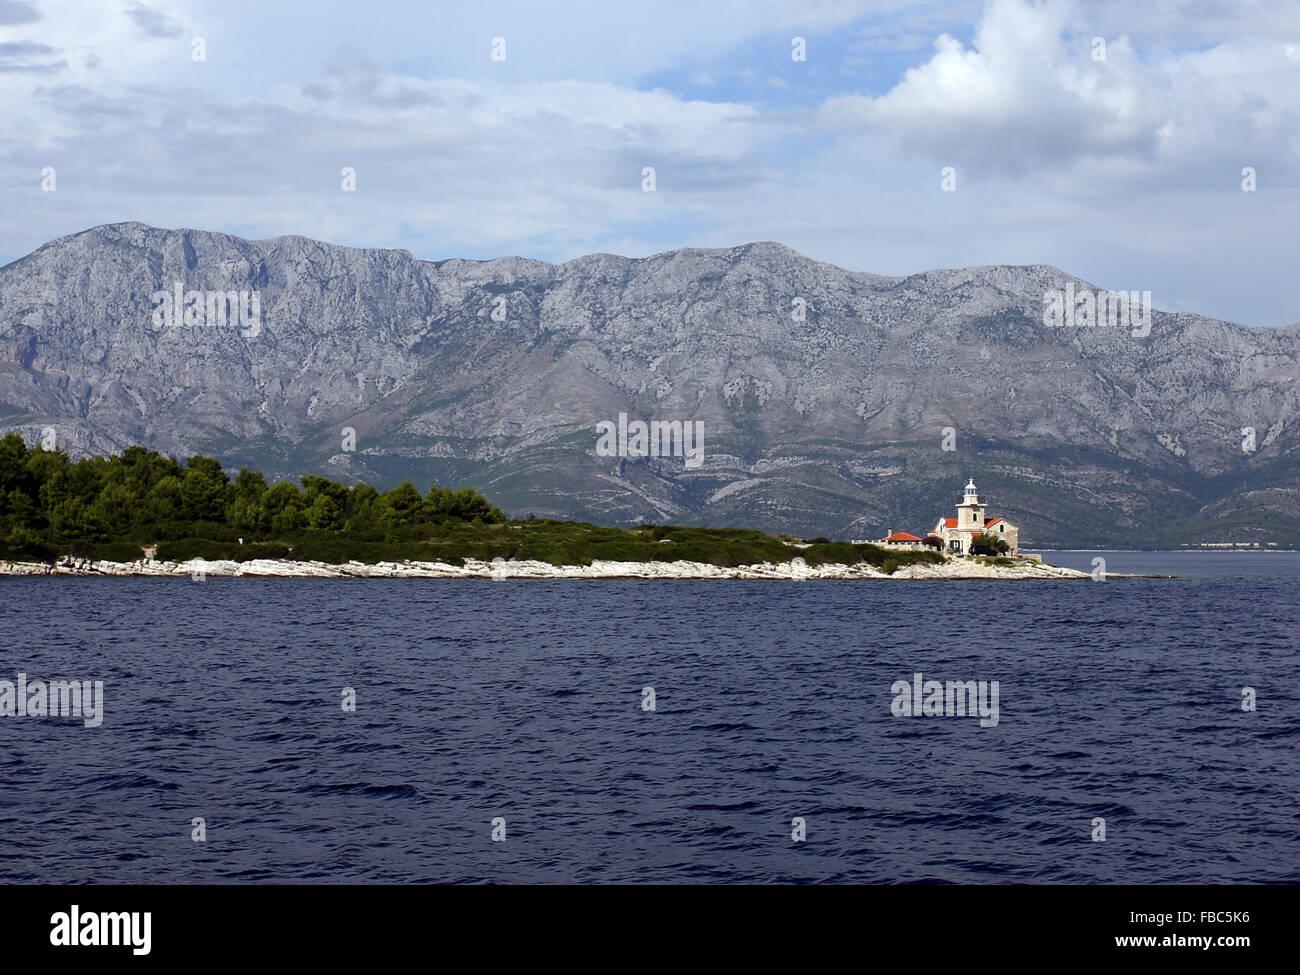 A building is pictured in the sunshine on the outskirts of Sućuraj on the island of Hvar in Croatia. Stock Photo